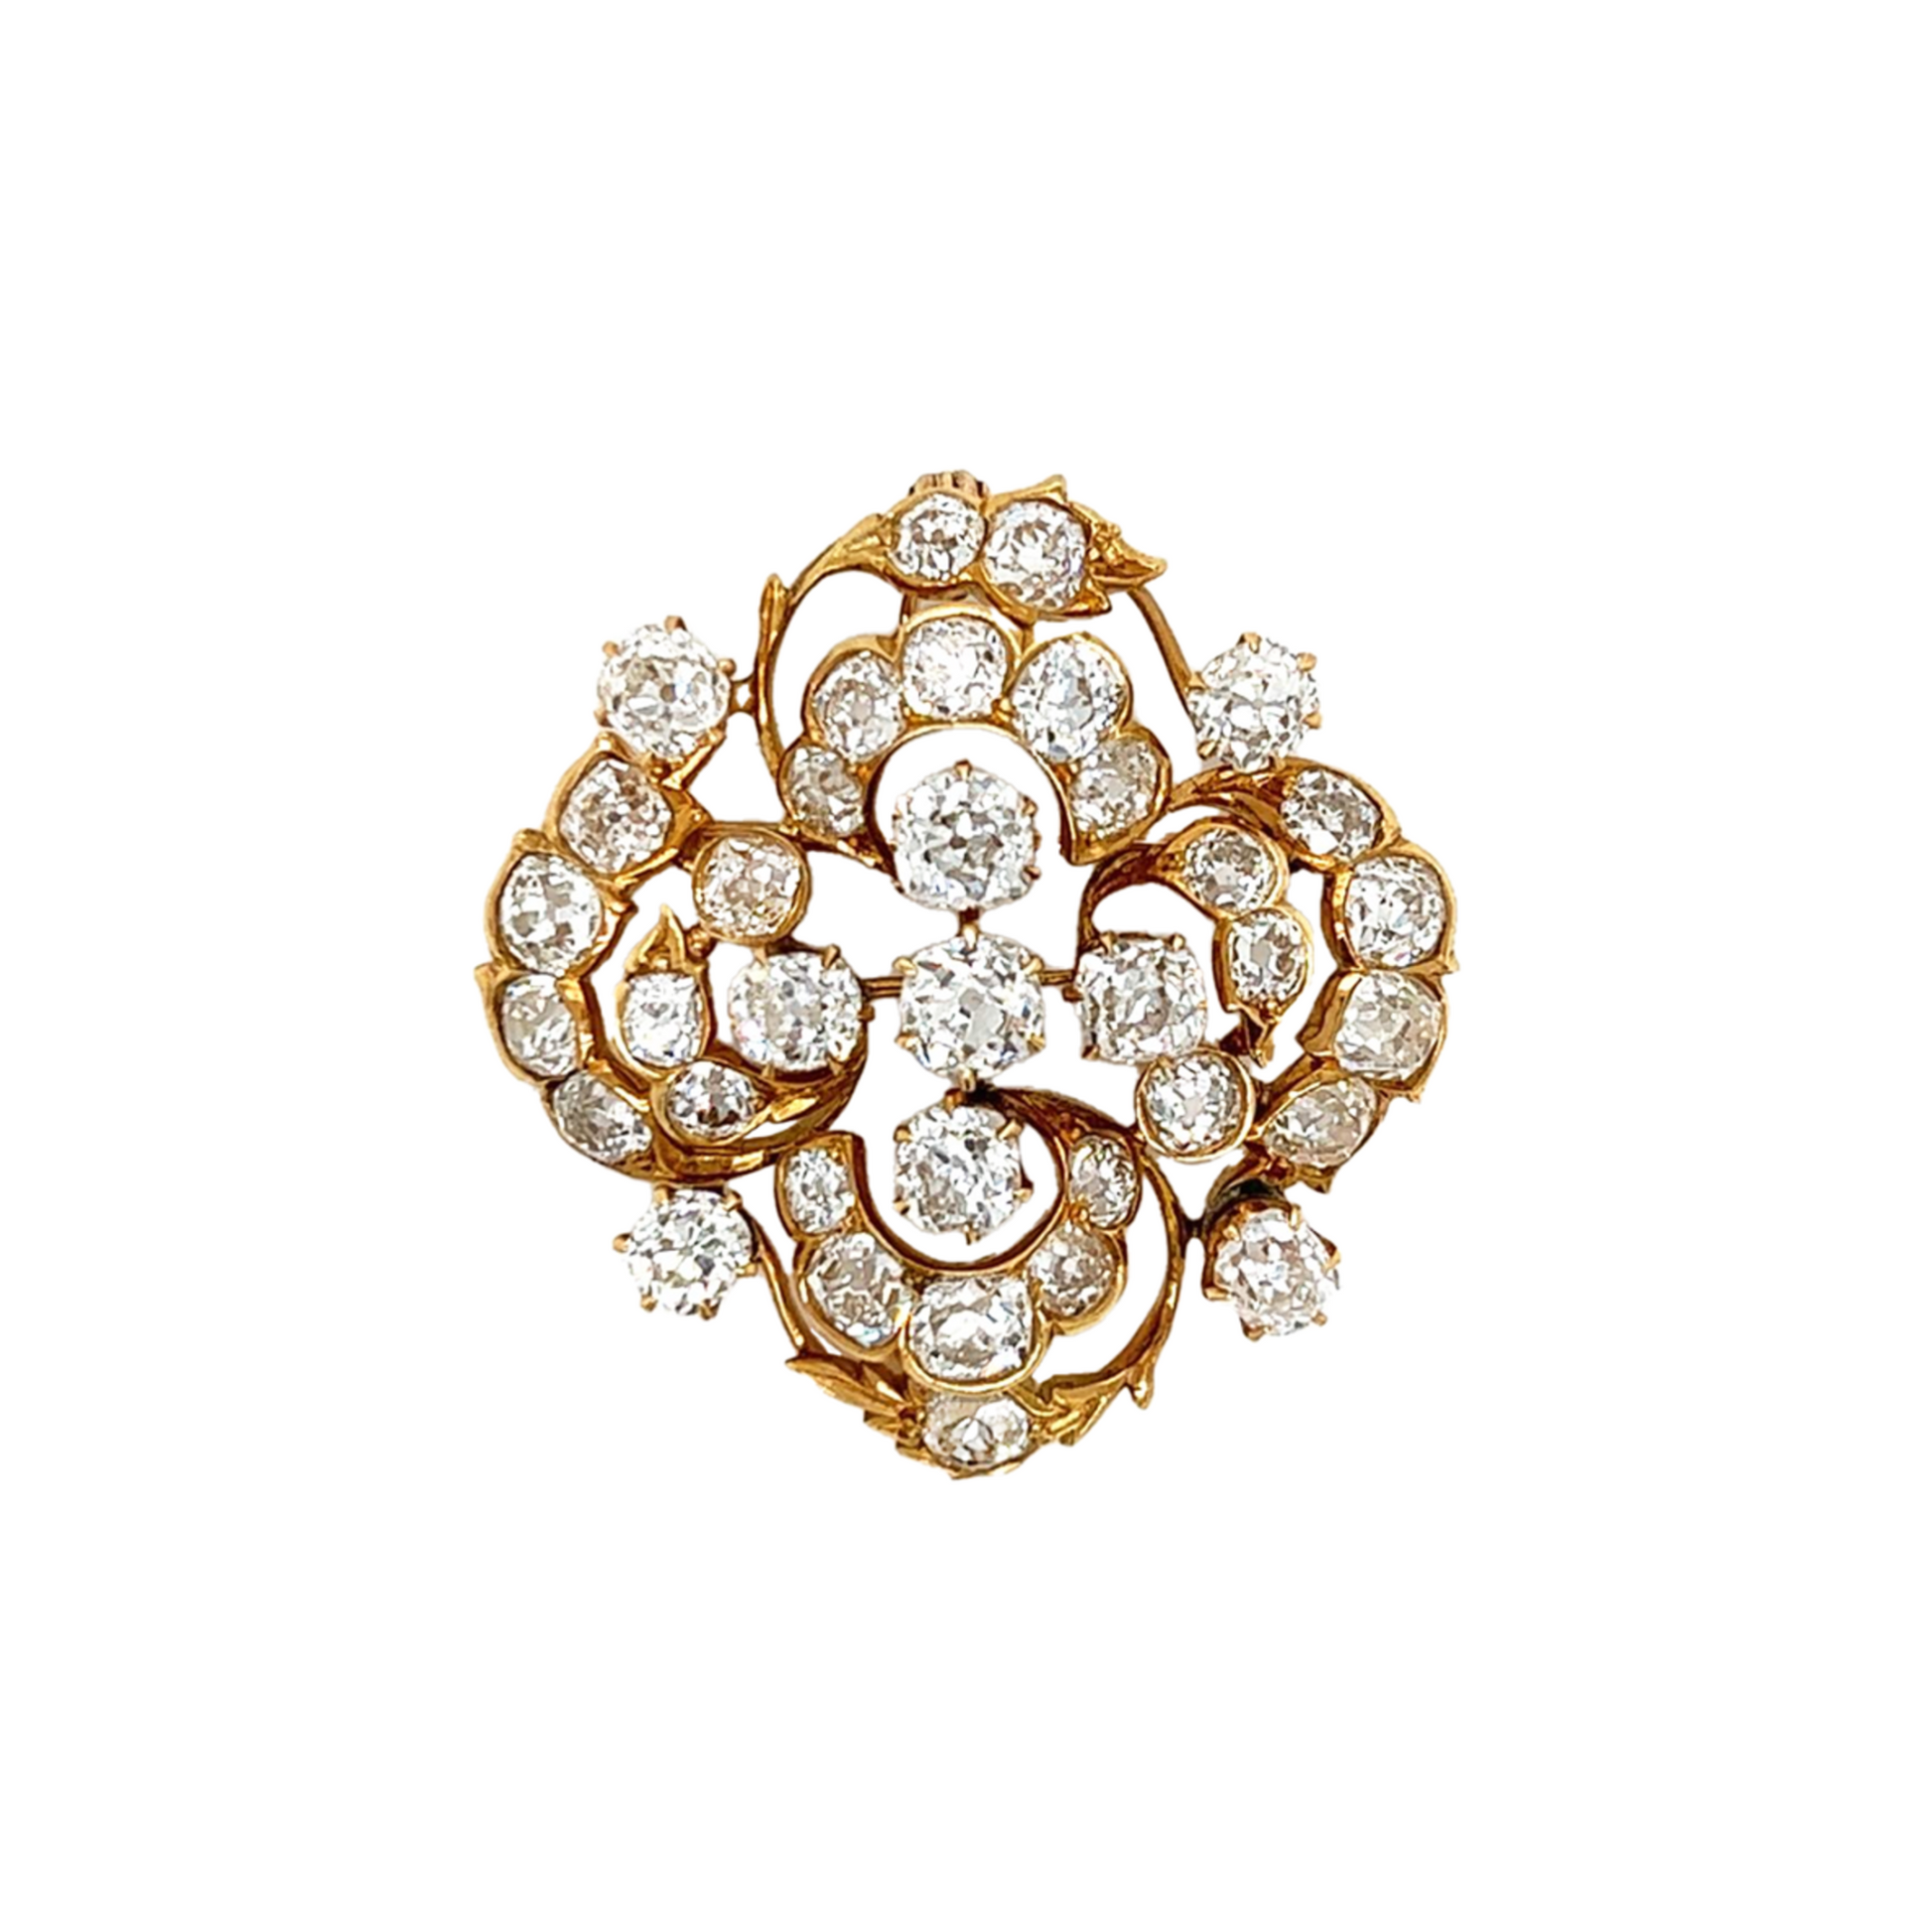 Victorian 14KT Yellow Gold Diamond Brooch front